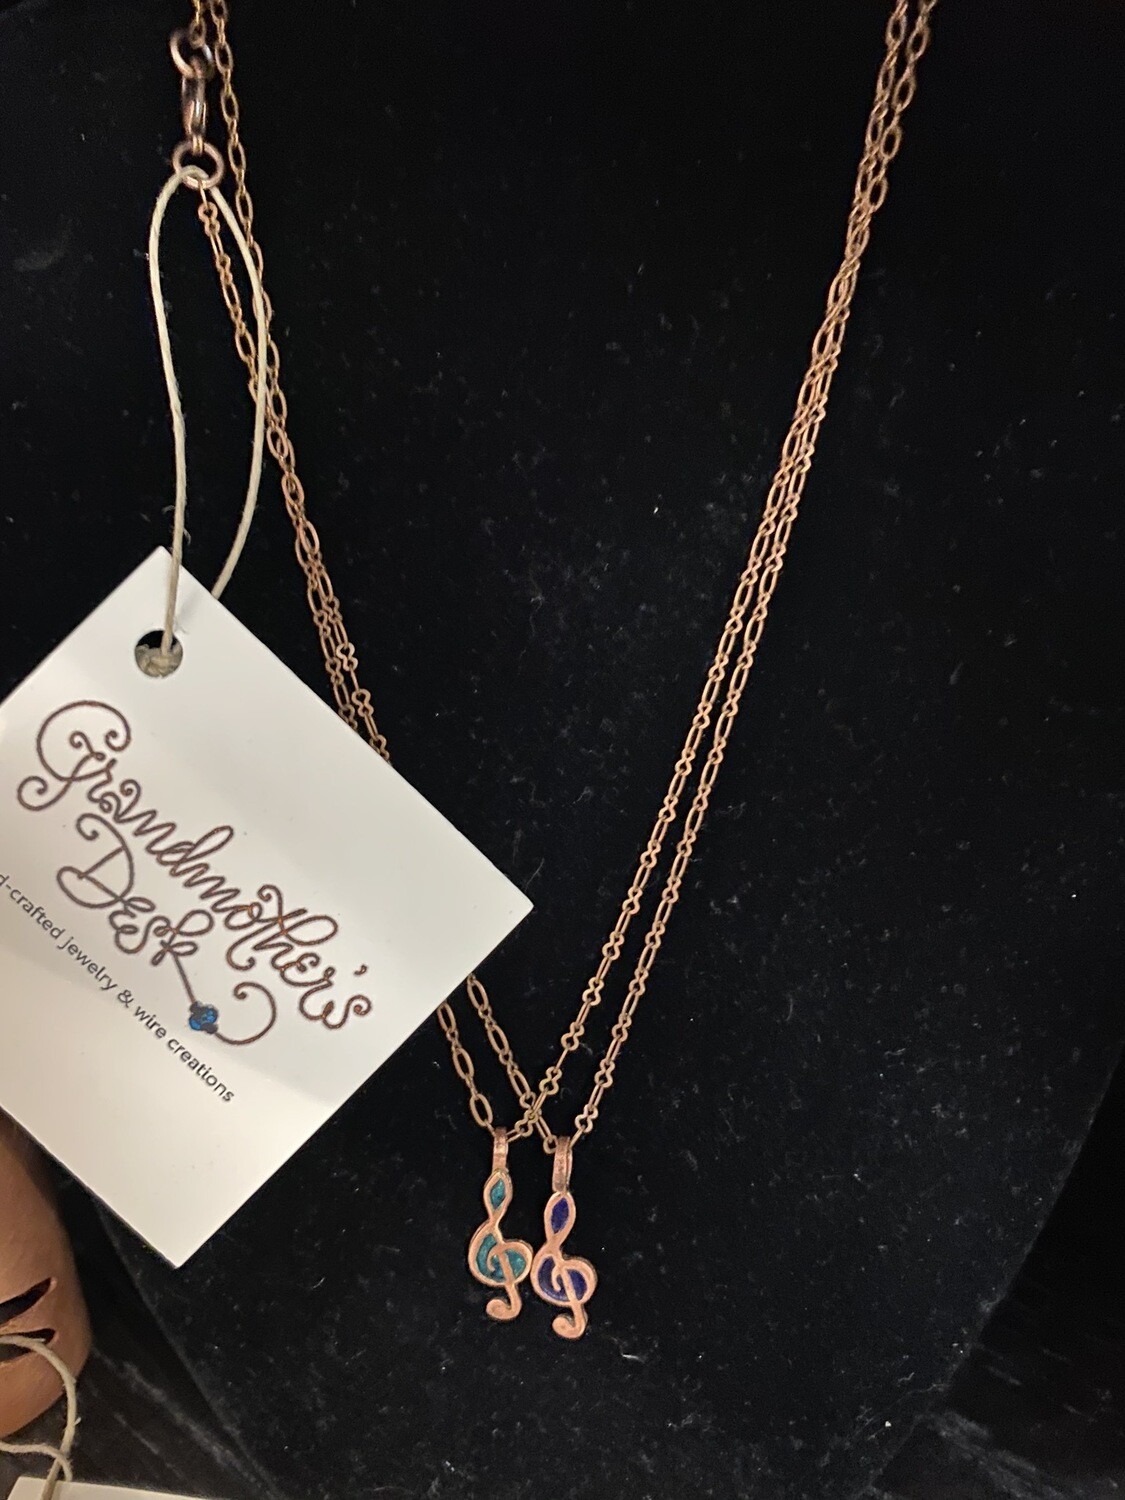 Grandmothers Desk Copper Treble Clef Musical Note Necklace Navy 